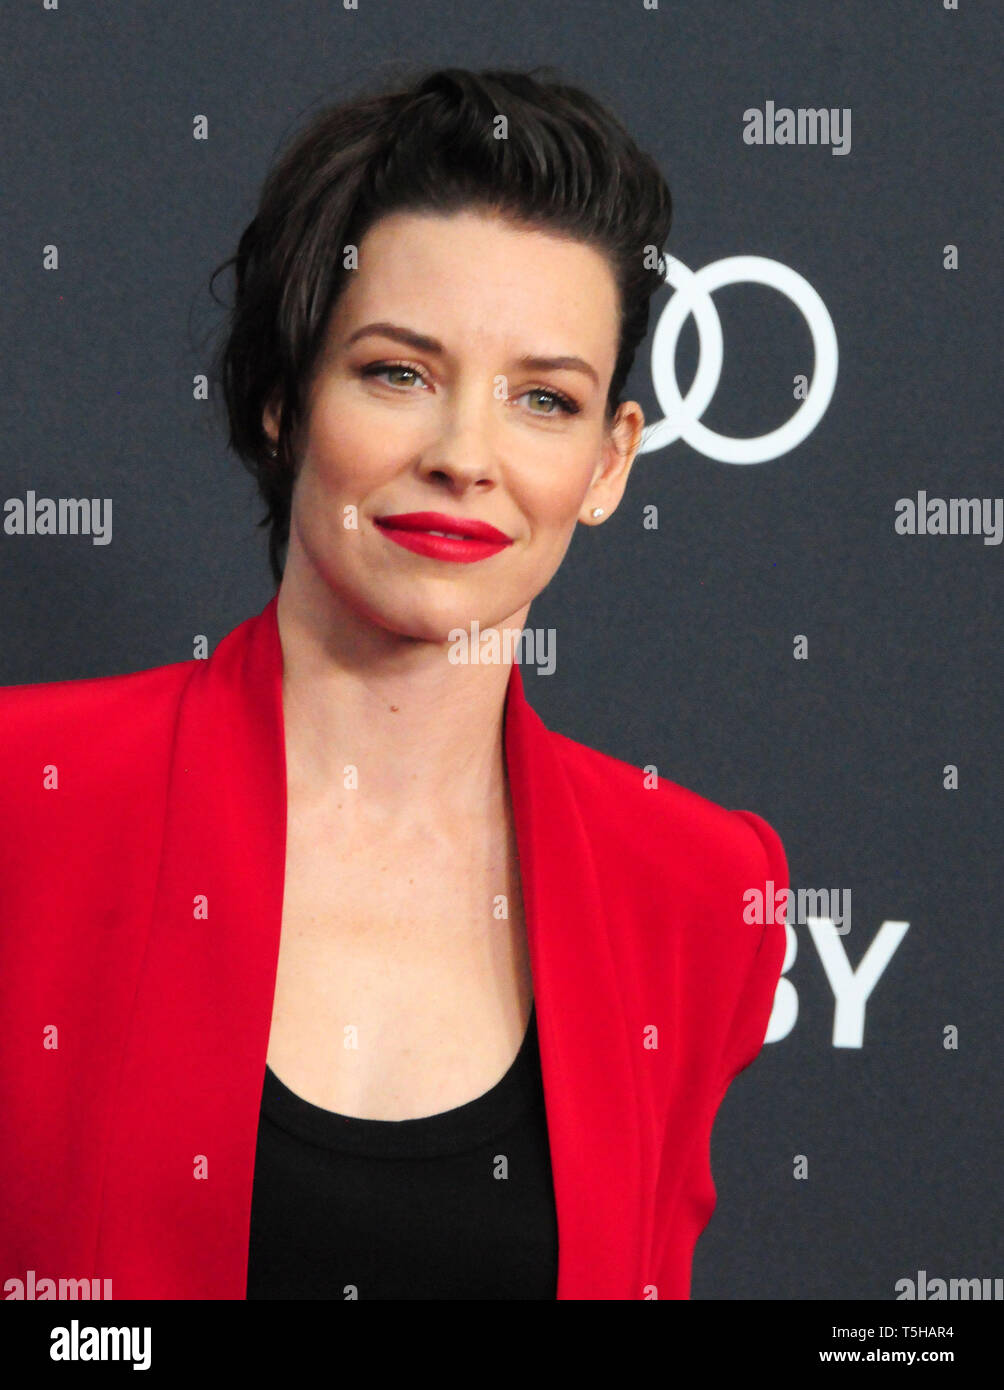 Los Angeles, California, USA 22nd April 2019  Actress Evangeline Lilly attends the World Premiere of Marvel Studios' 'Avengers: Endgame' on April 22, 2019 at Los Angeles Convention Center in Los Angeles, California, USA. Photo by Barry King/Alamy Stock Photo Stock Photo